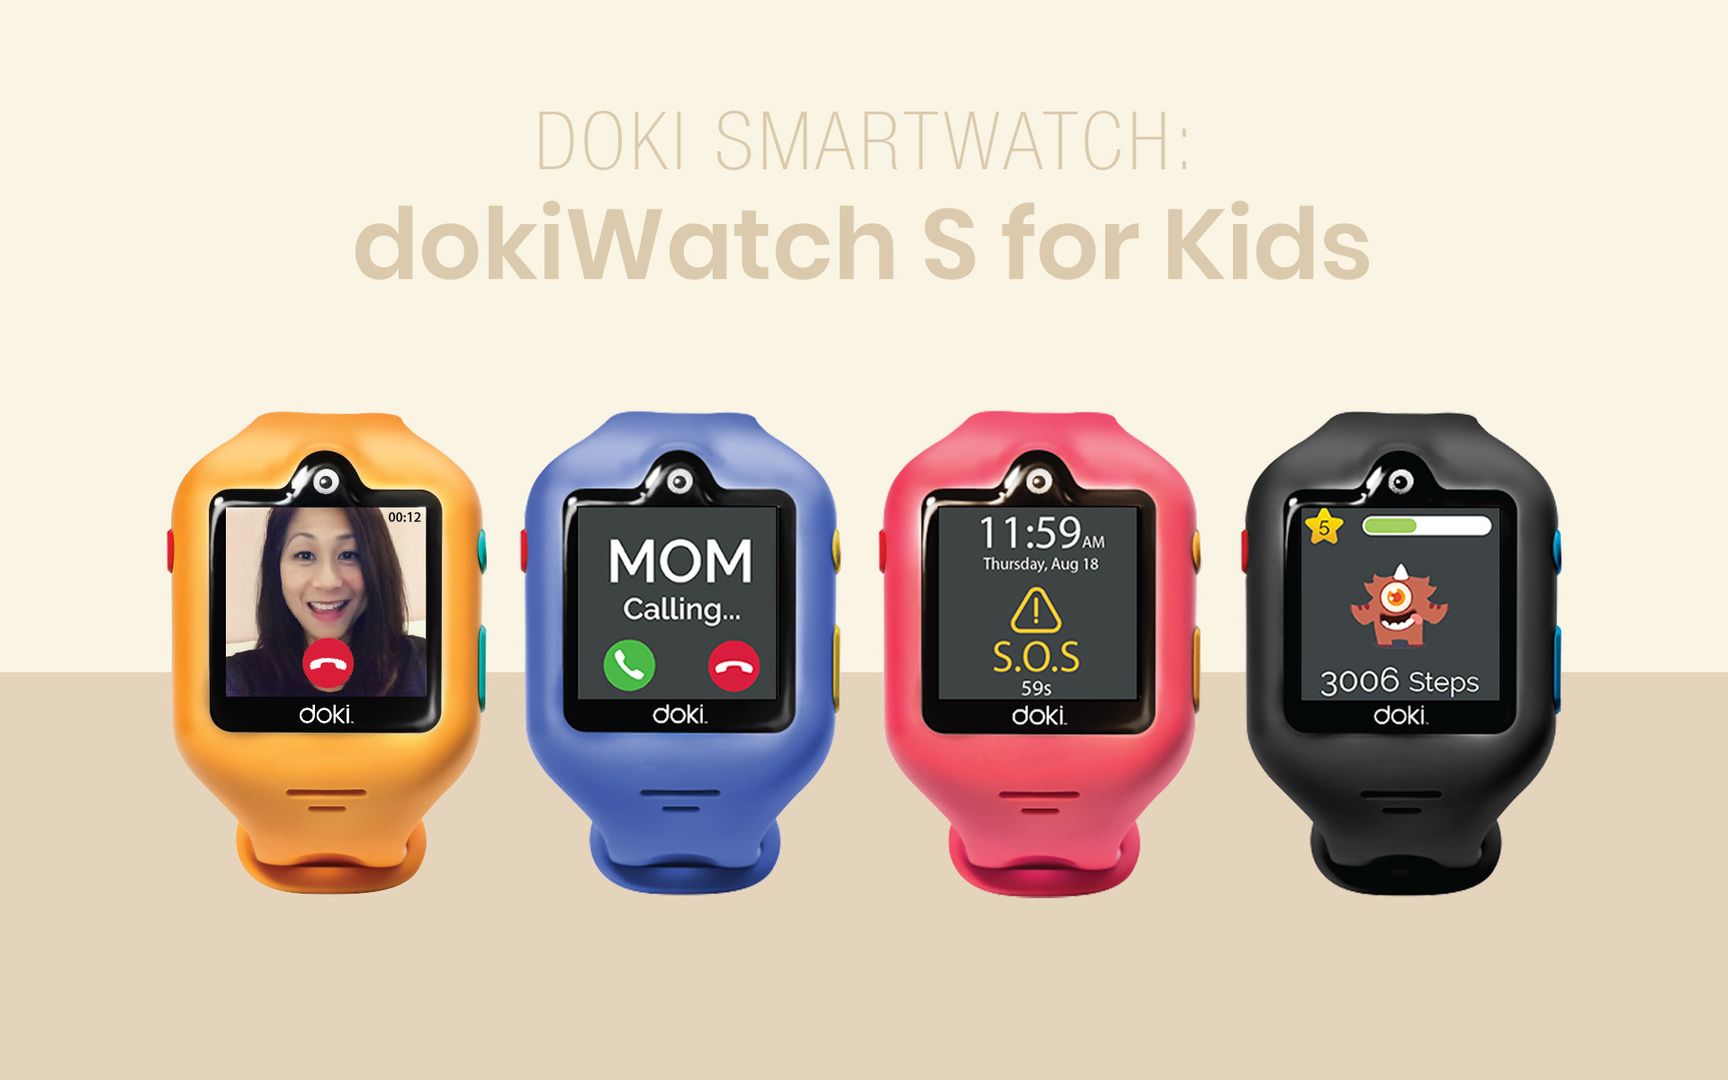 Doki Launches the dokiWatch S Kid’s Smartwatch with Alexa Support